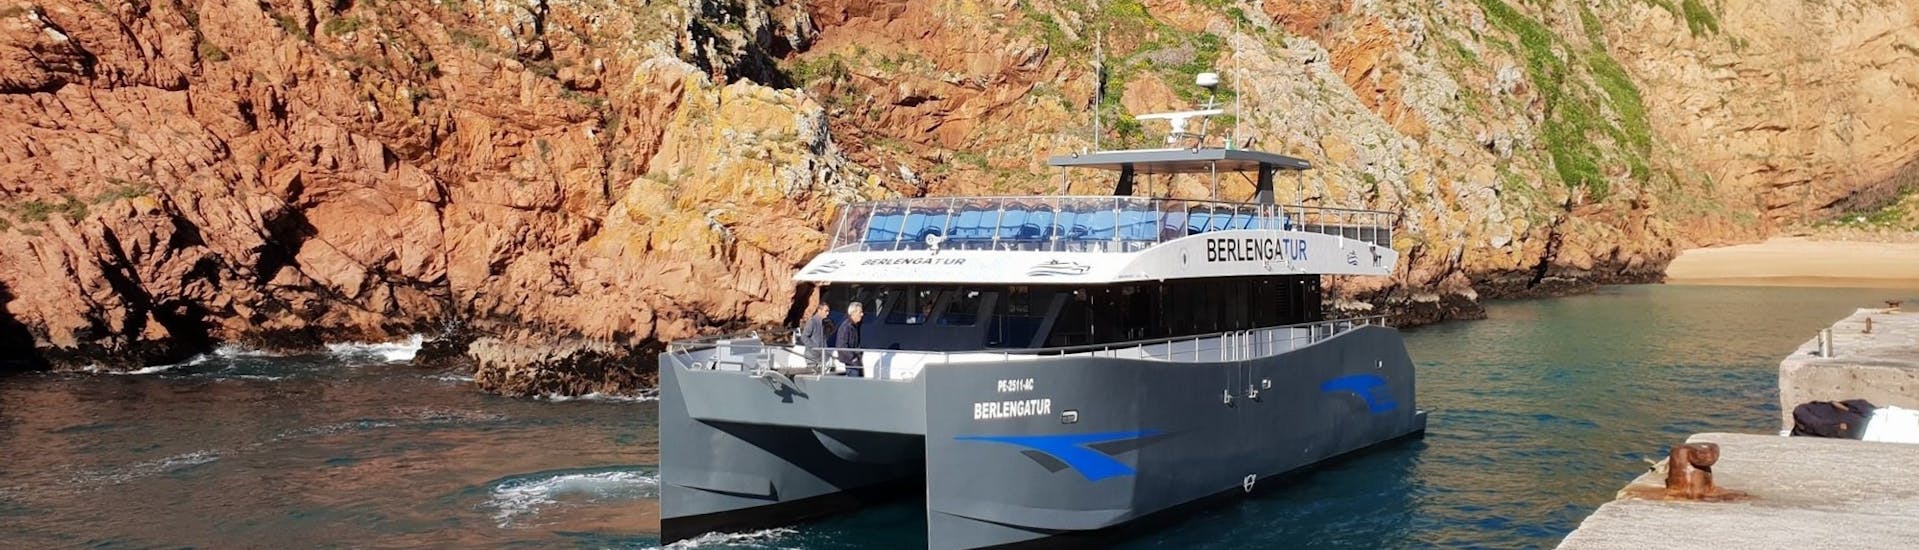 View of our boat during the Boat Trip to the Berlenga Island from Peniche with Berlengatur Peniche.